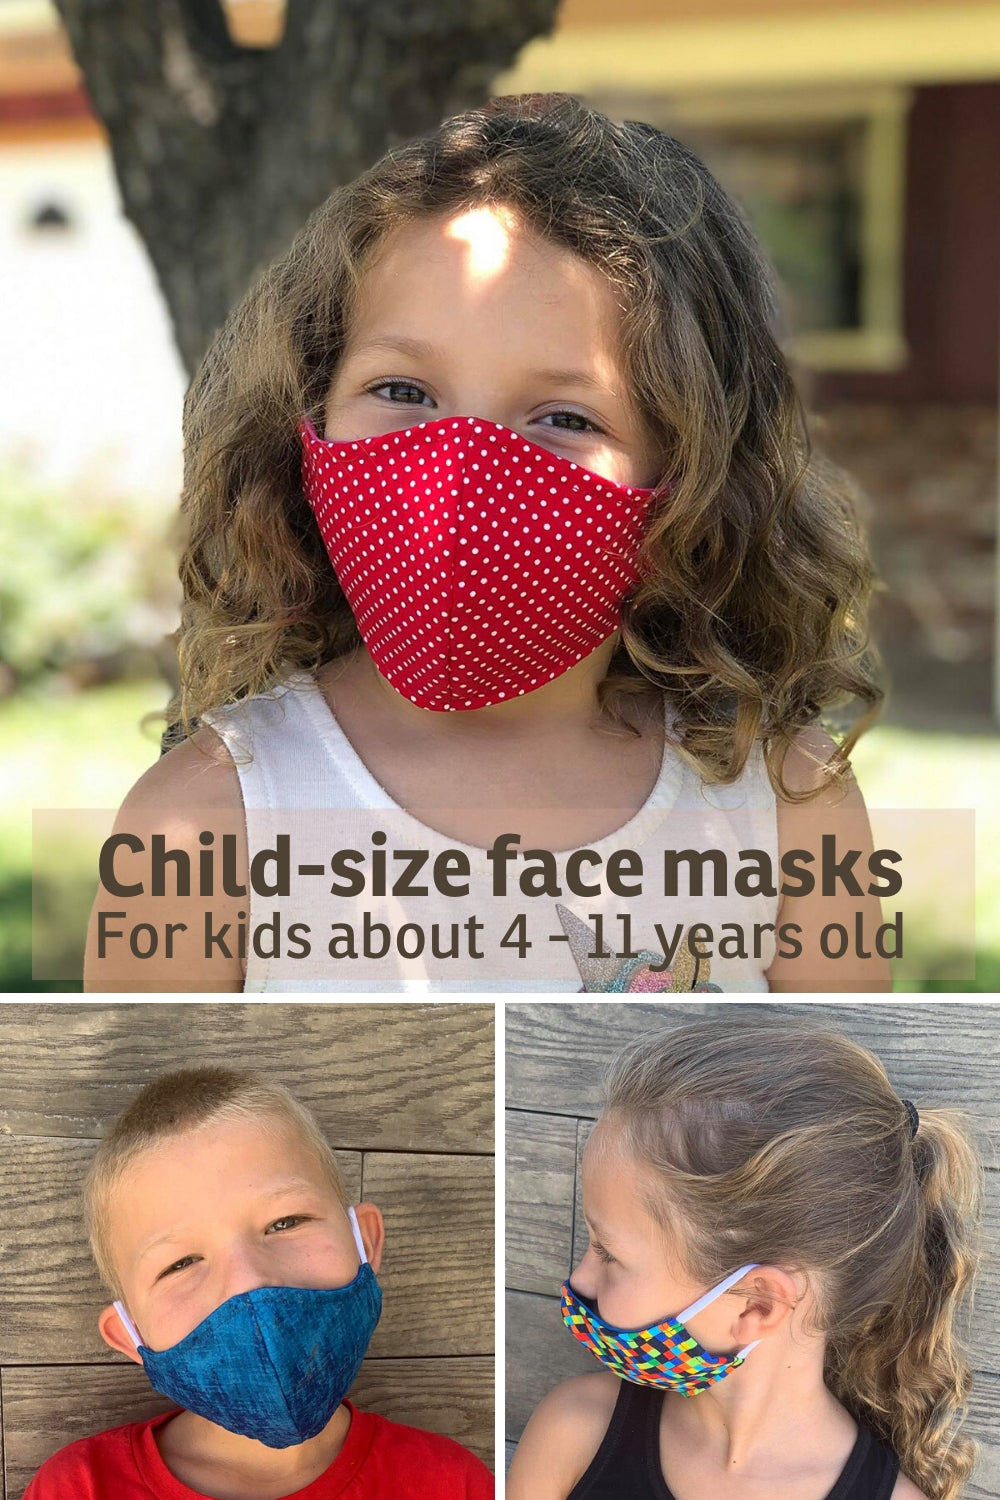 Face masks made for children about 4 to 11 years old. Made in USA. 